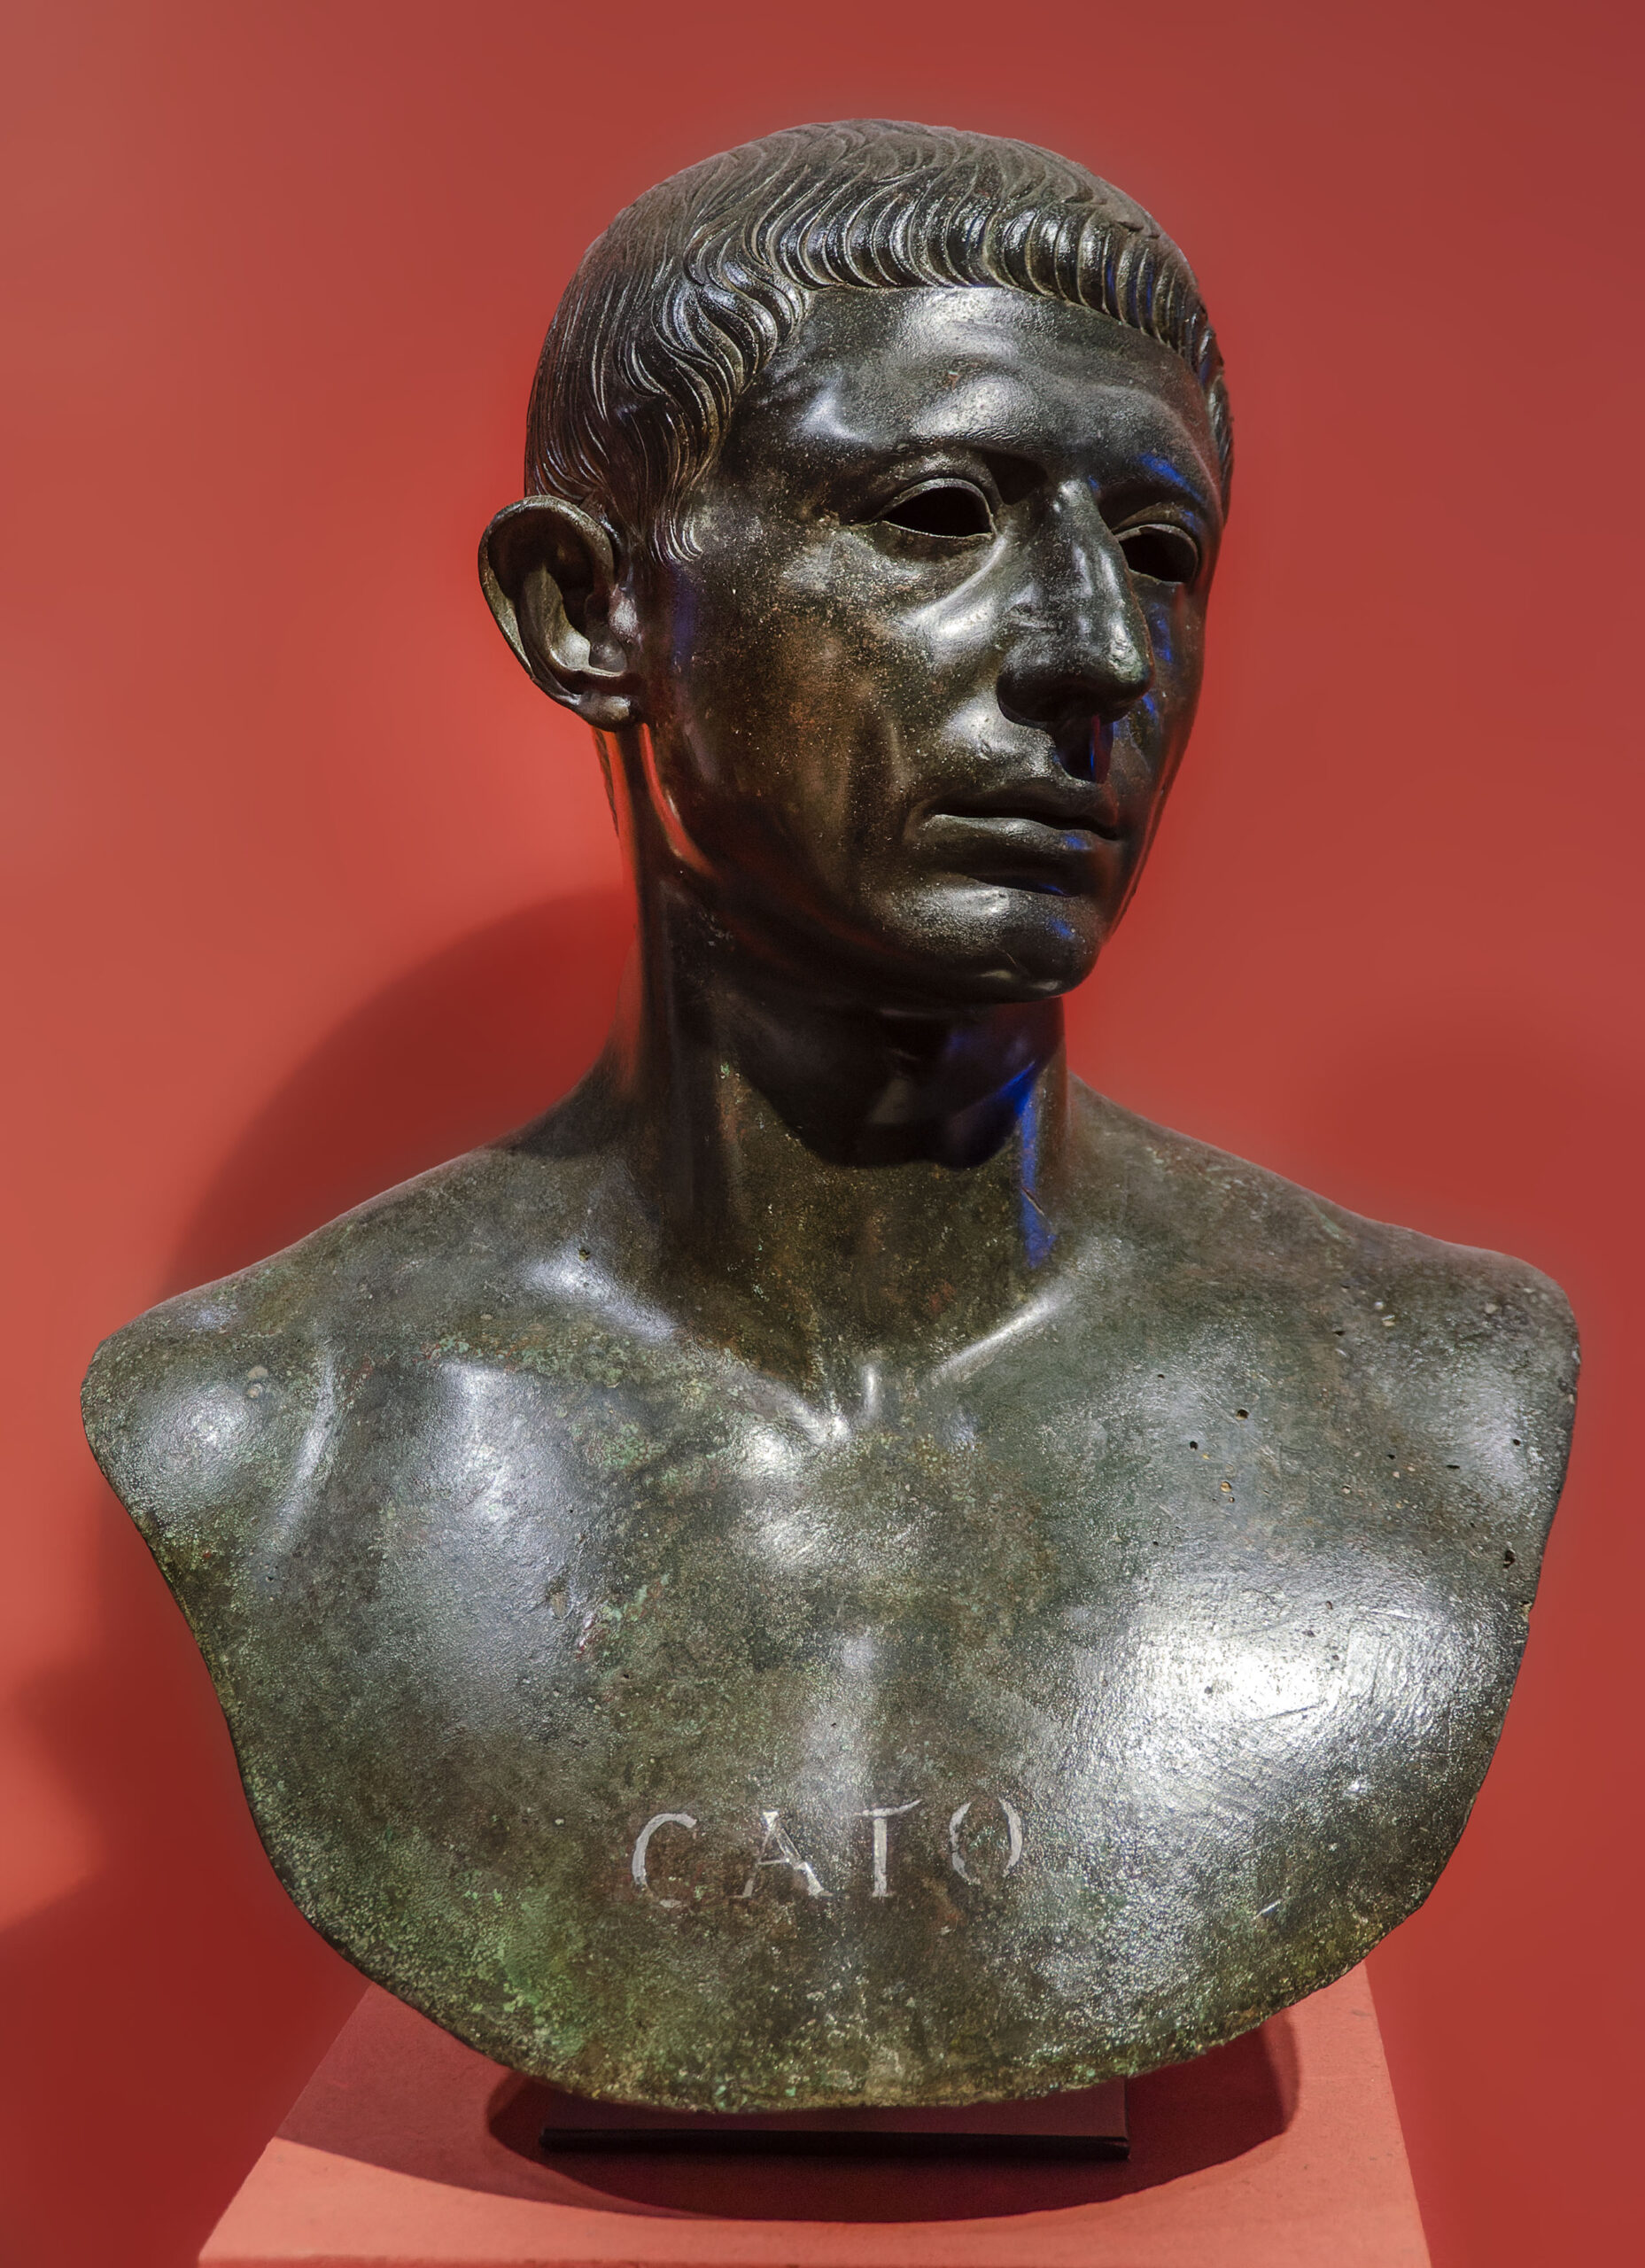 Bust of Cato the Younger, Archaeological Museum of Rabat, Morocco Photo by Ángel M. Felicísimo from Mérida, España - Catón. 